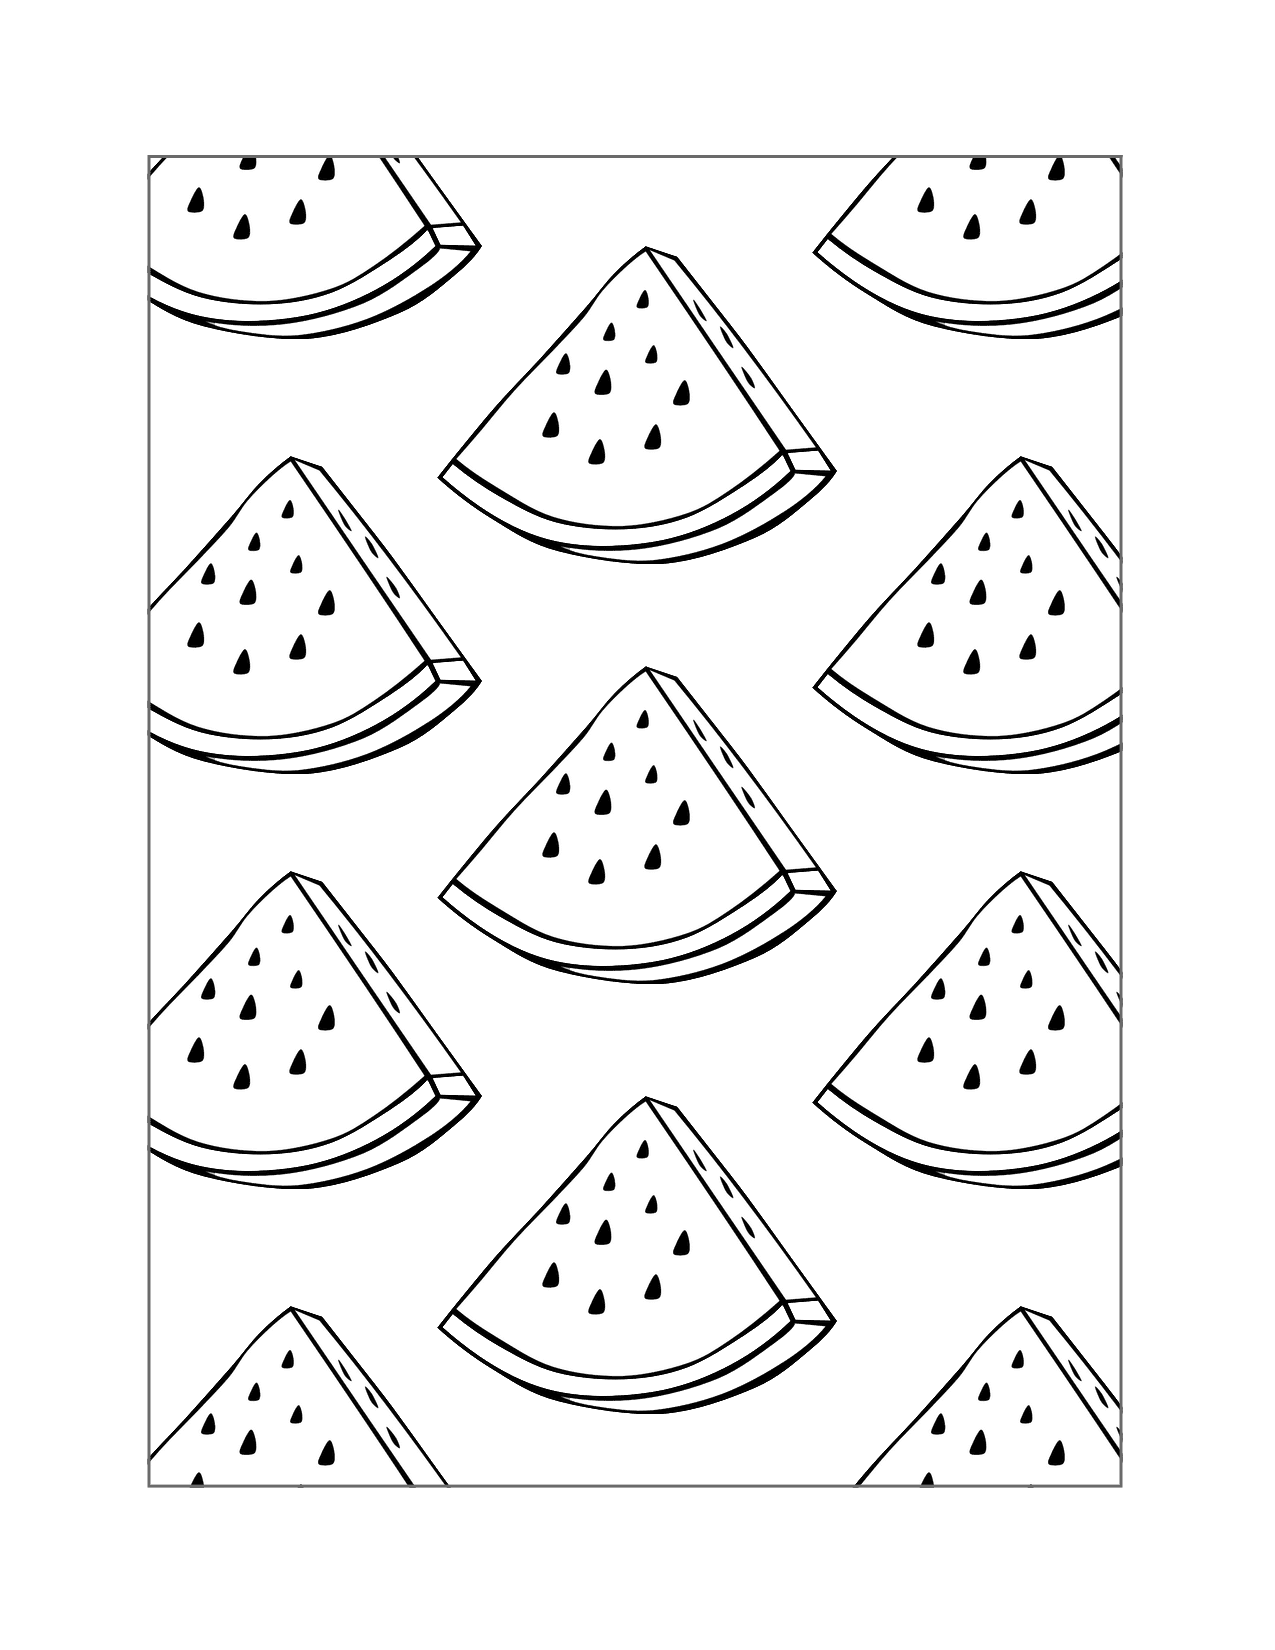 Watermelon Pattern Coloring Page